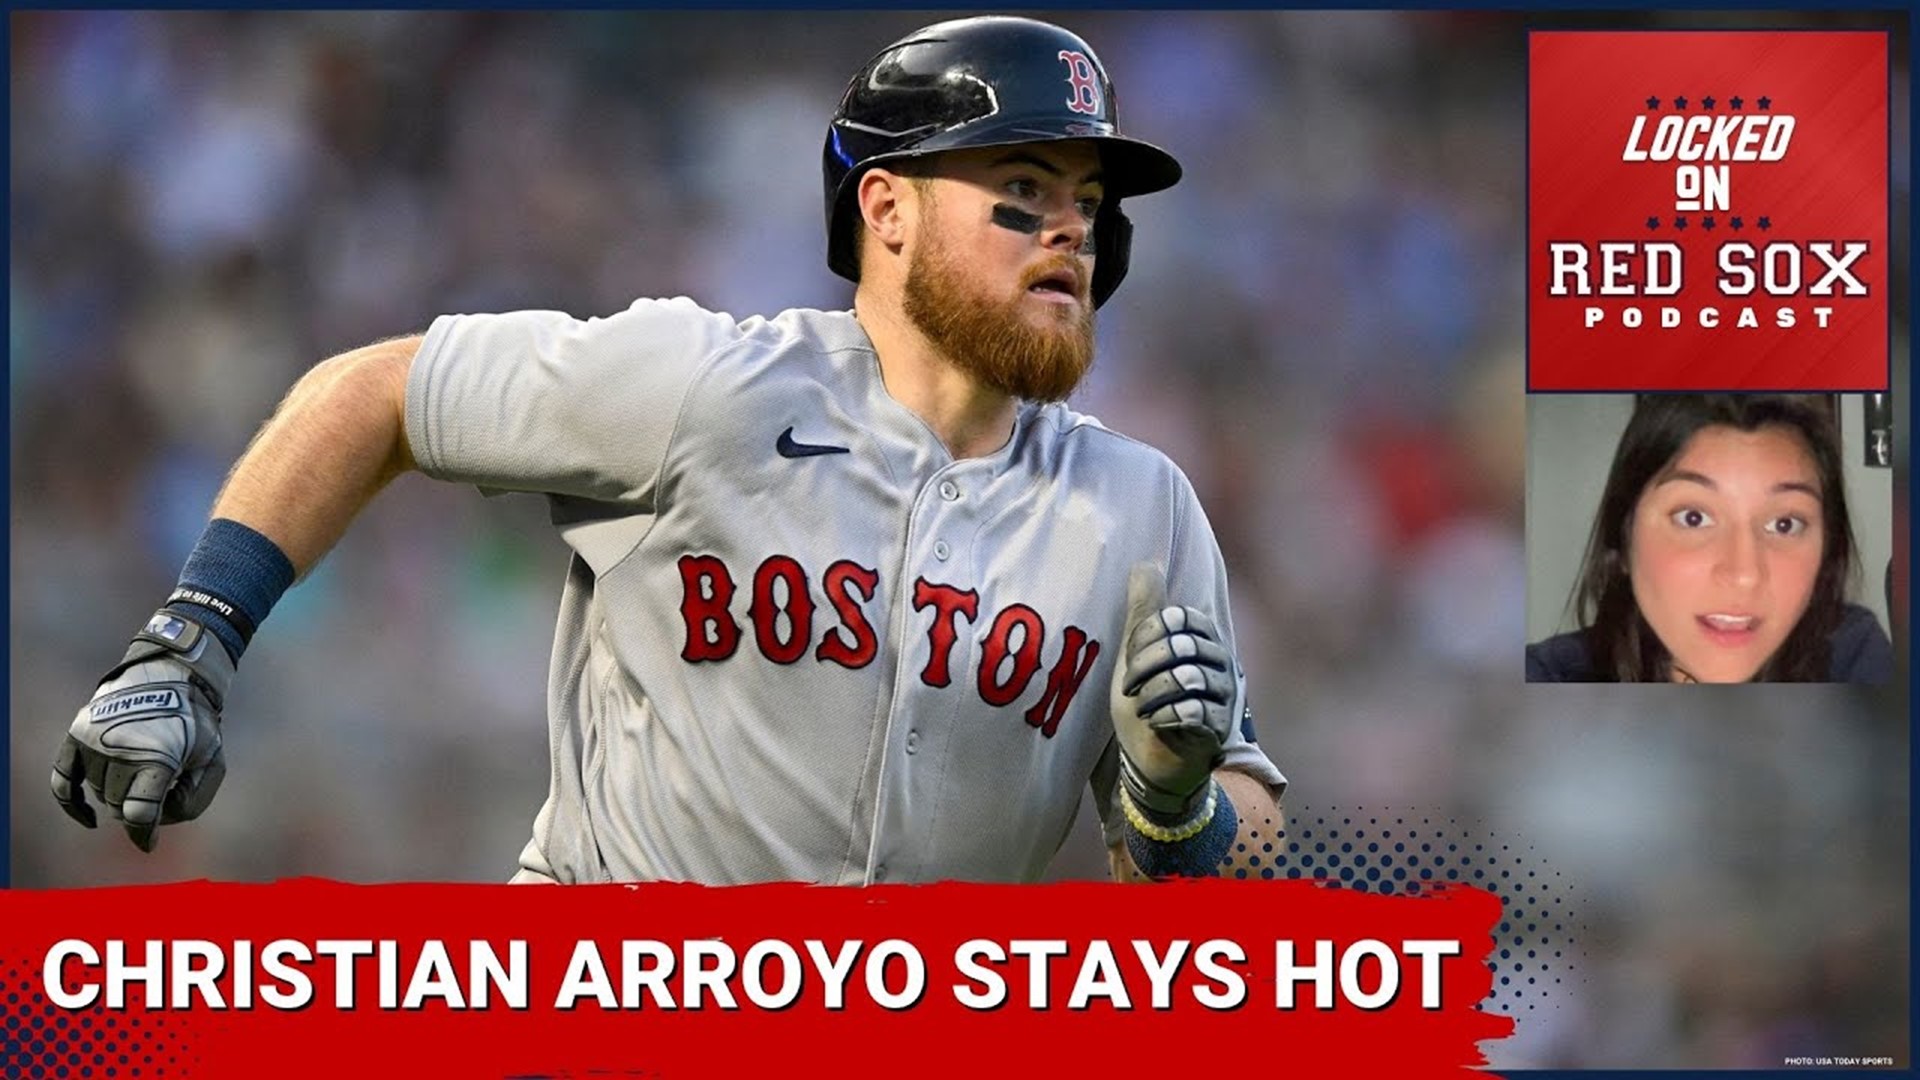 Christian Arroyo stays hot at the plate as Boston Red Sox offense